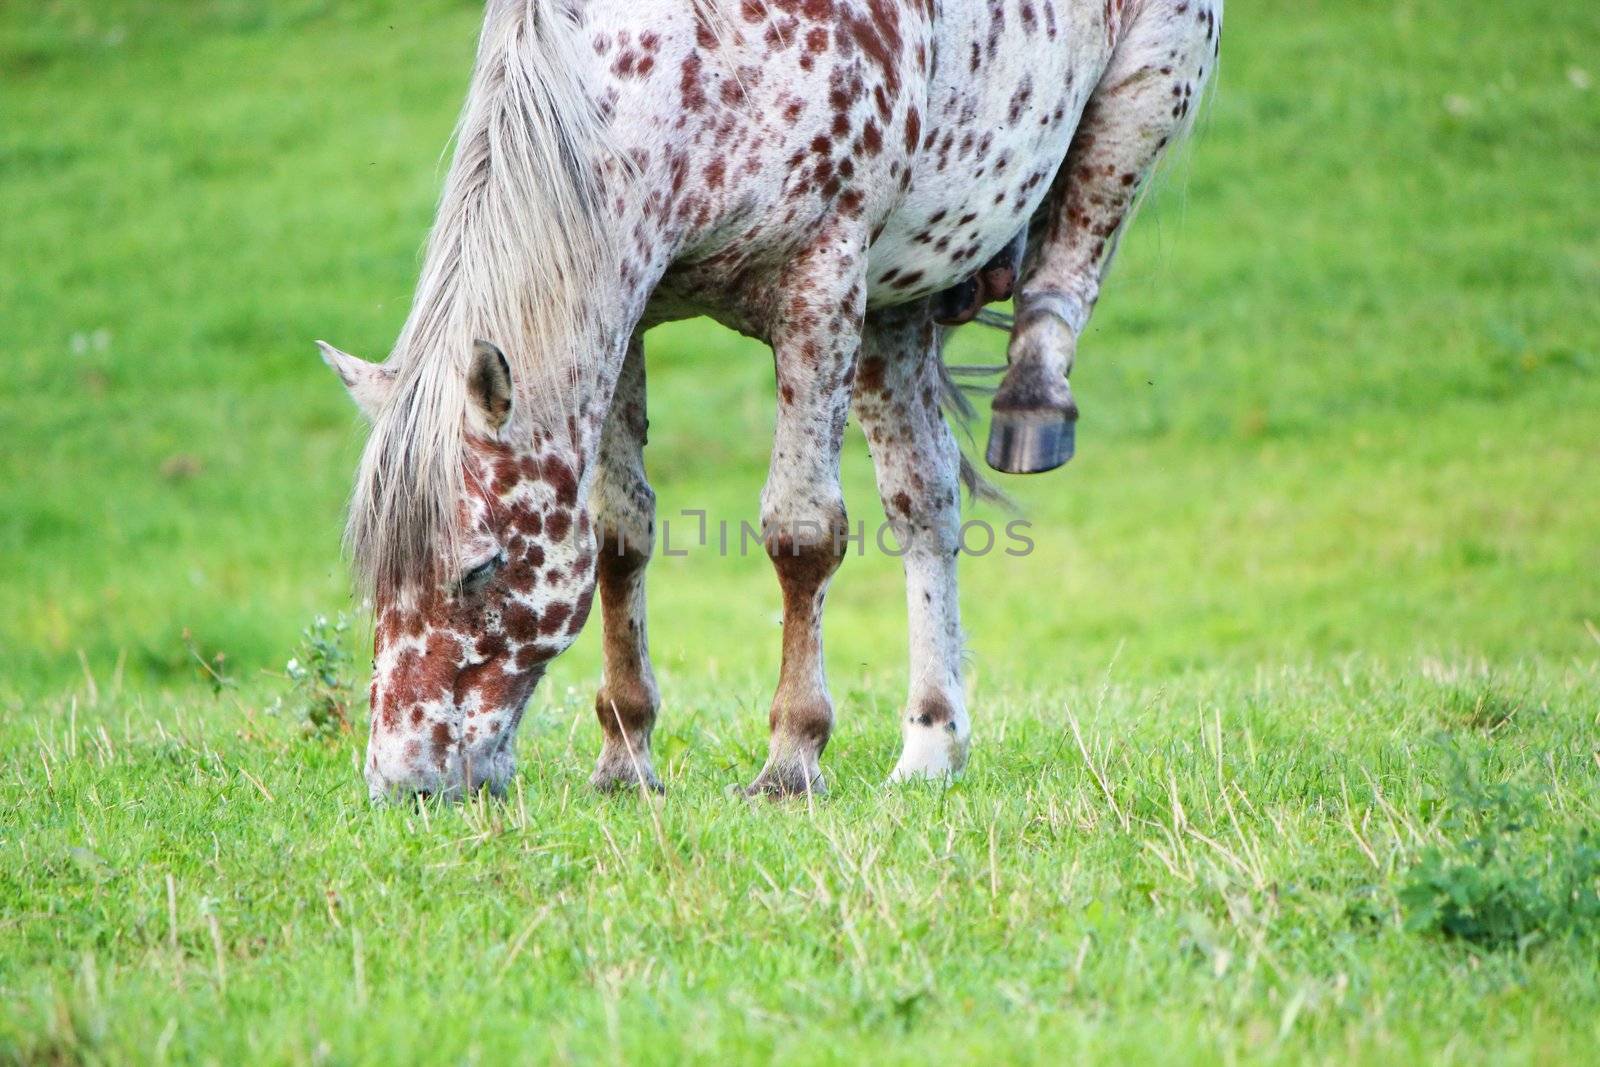 White and bown appaloosa horse with one leg up eating the grass in a meadow